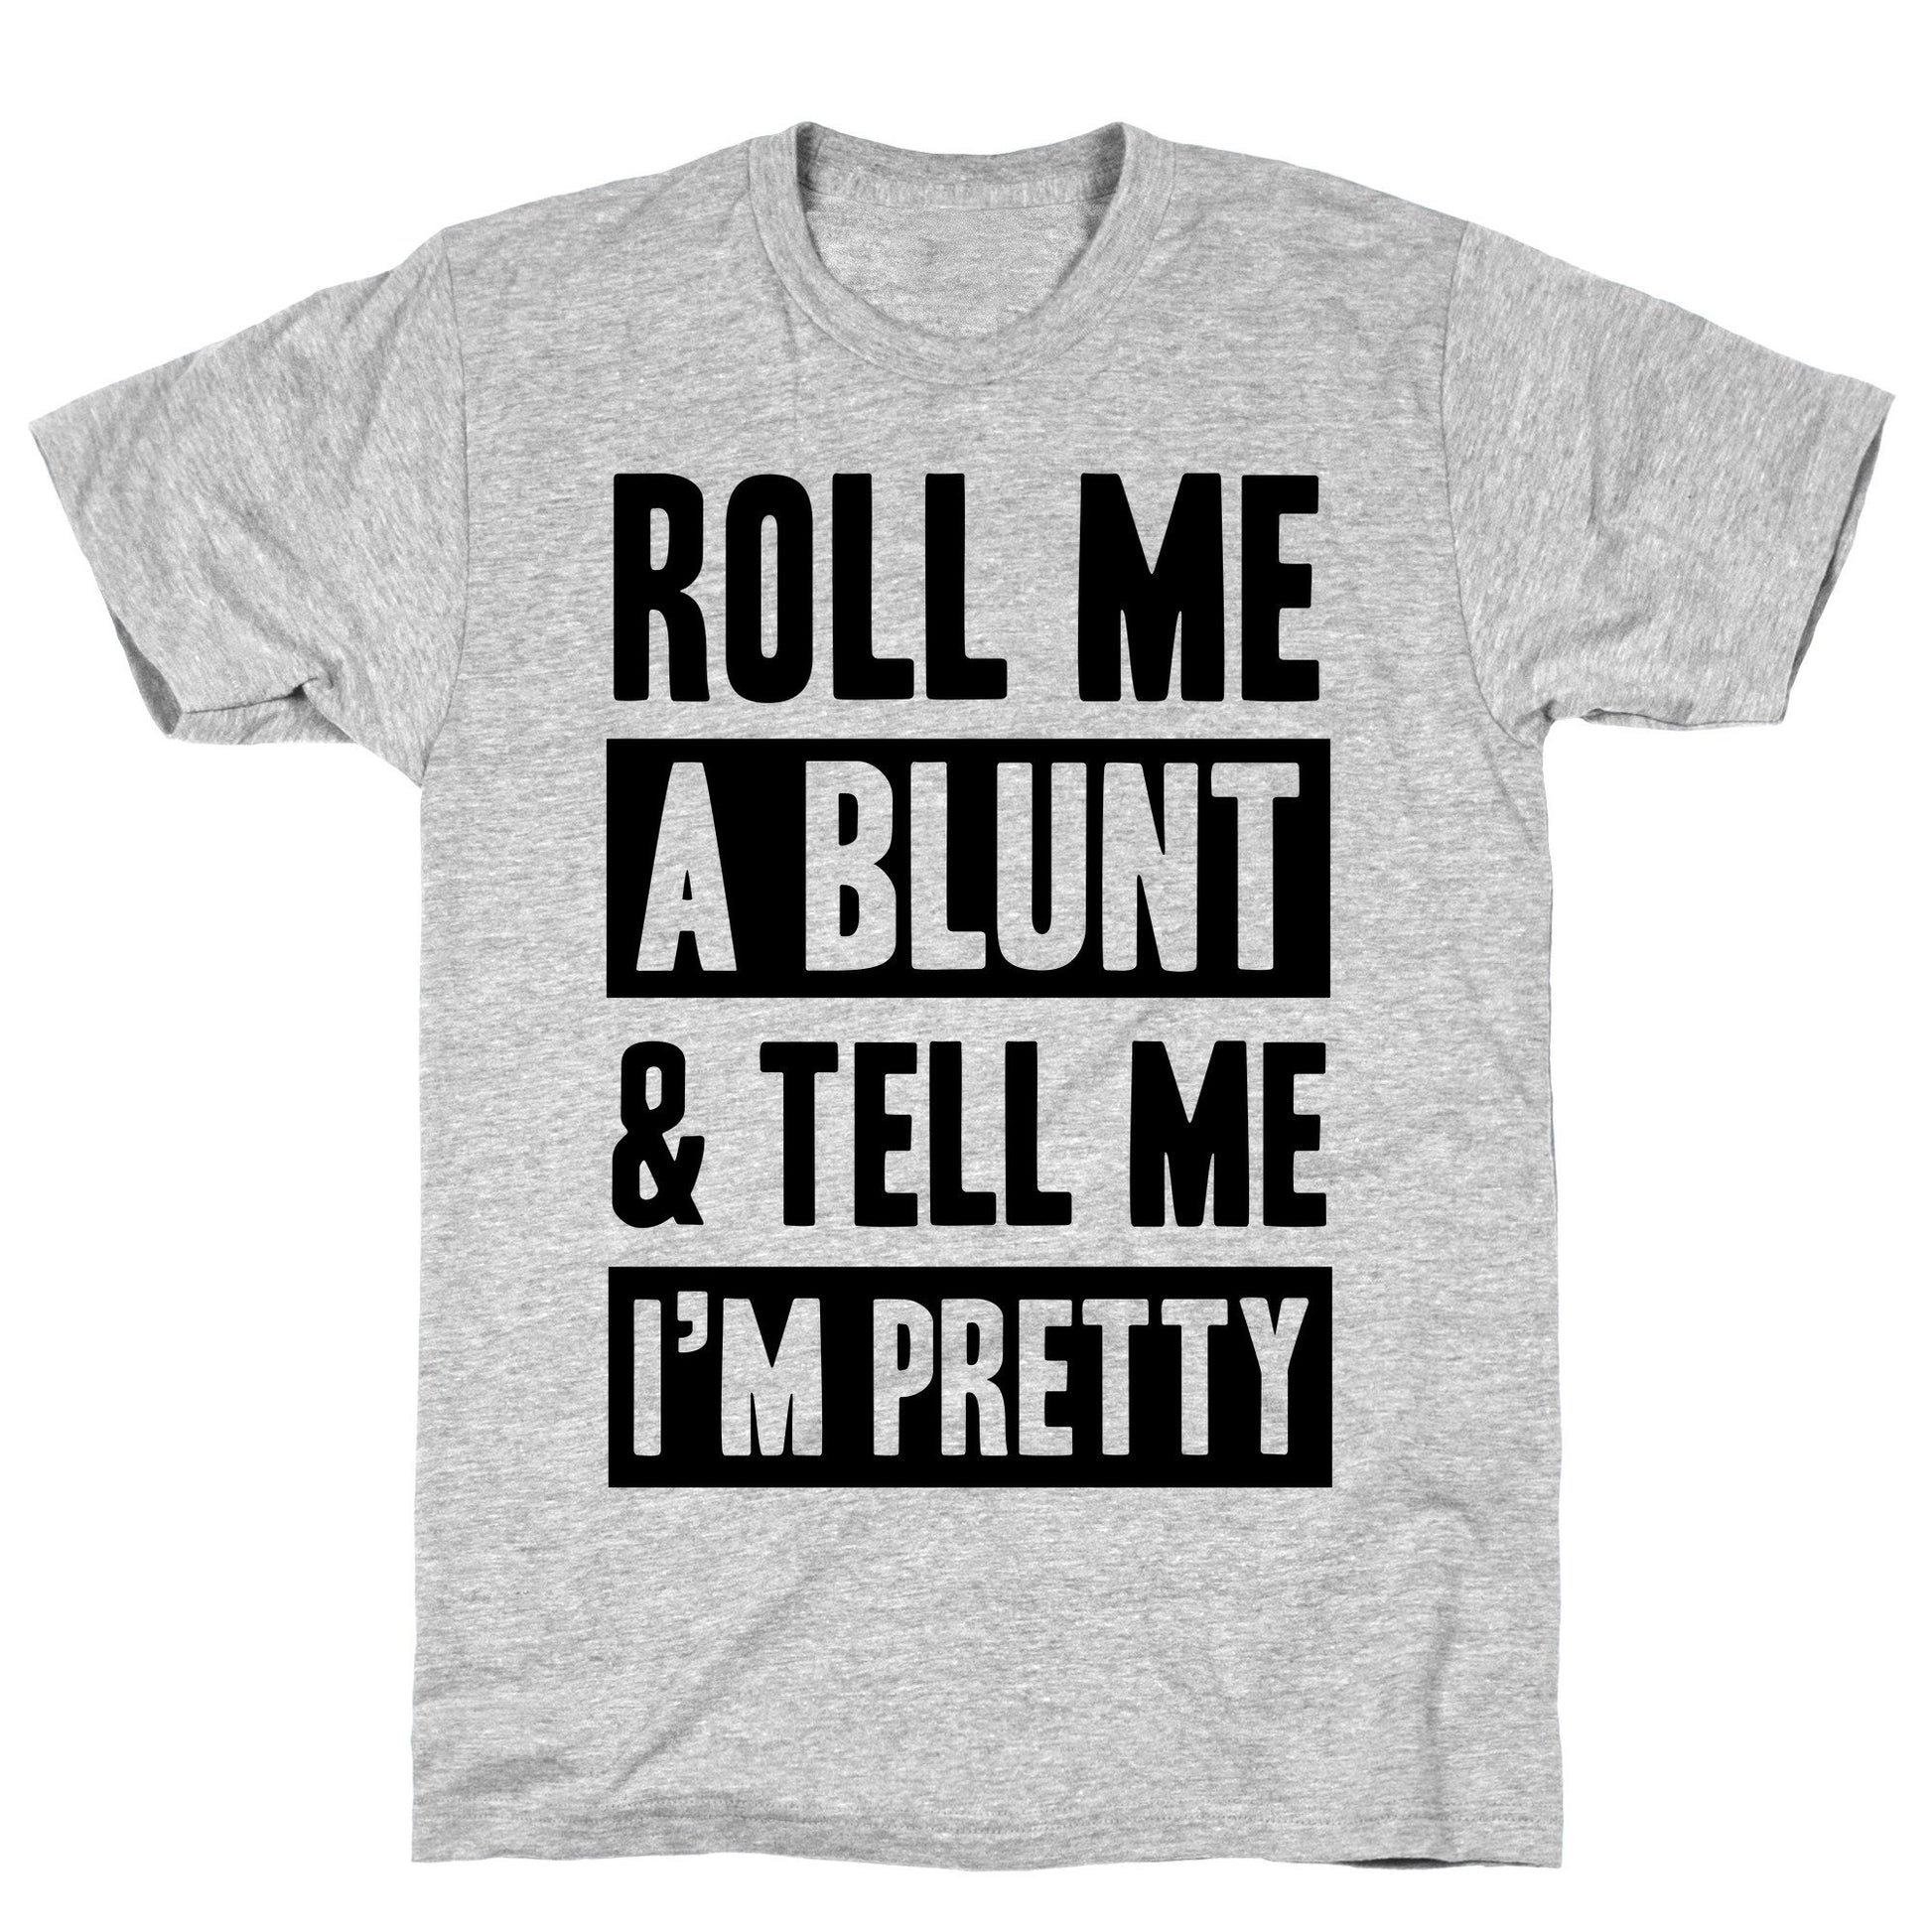 Roll Me A Blunt & Tell Me I'm Pretty Athletic Gray Unisex Cotton Tee by LookHUMAN Flower Power Packages 